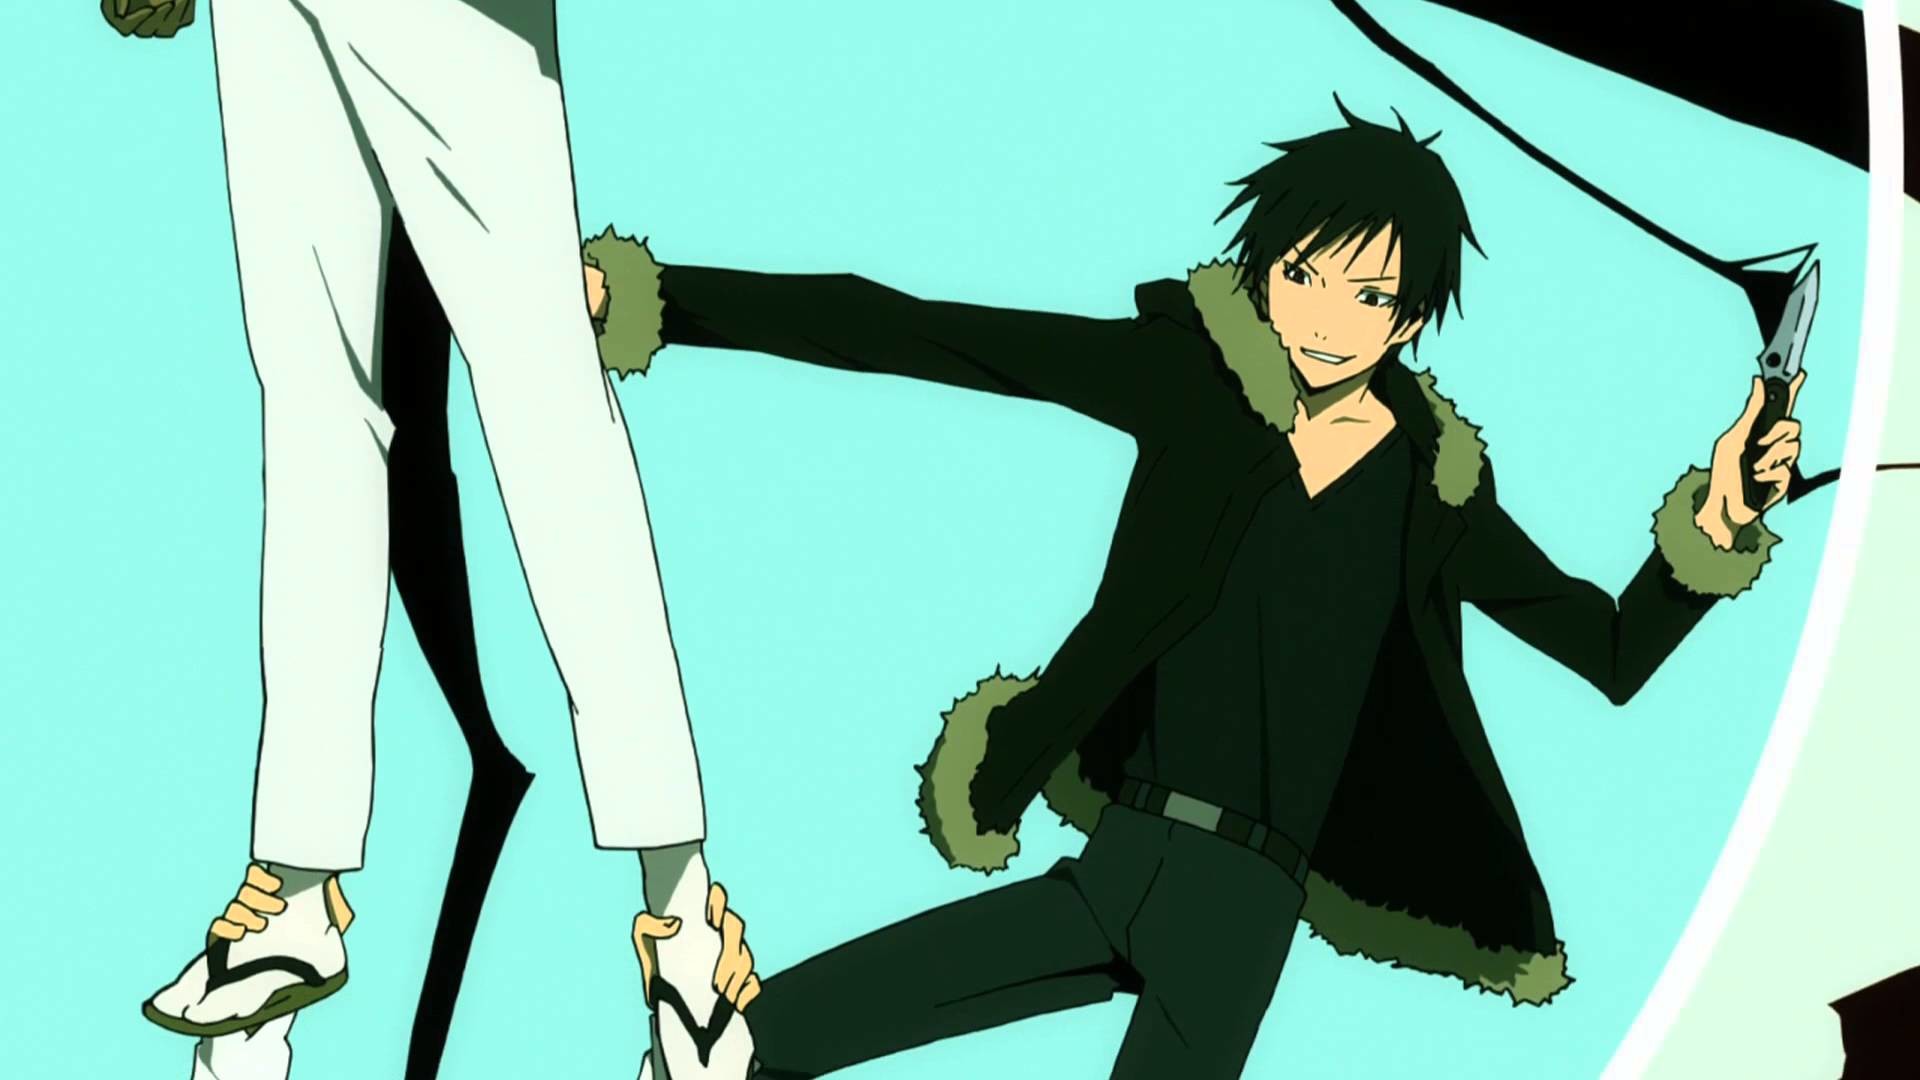 1920x1080 Anime Wallpapers Durarara!! HD 4K Download For Mobile iPhone & PC